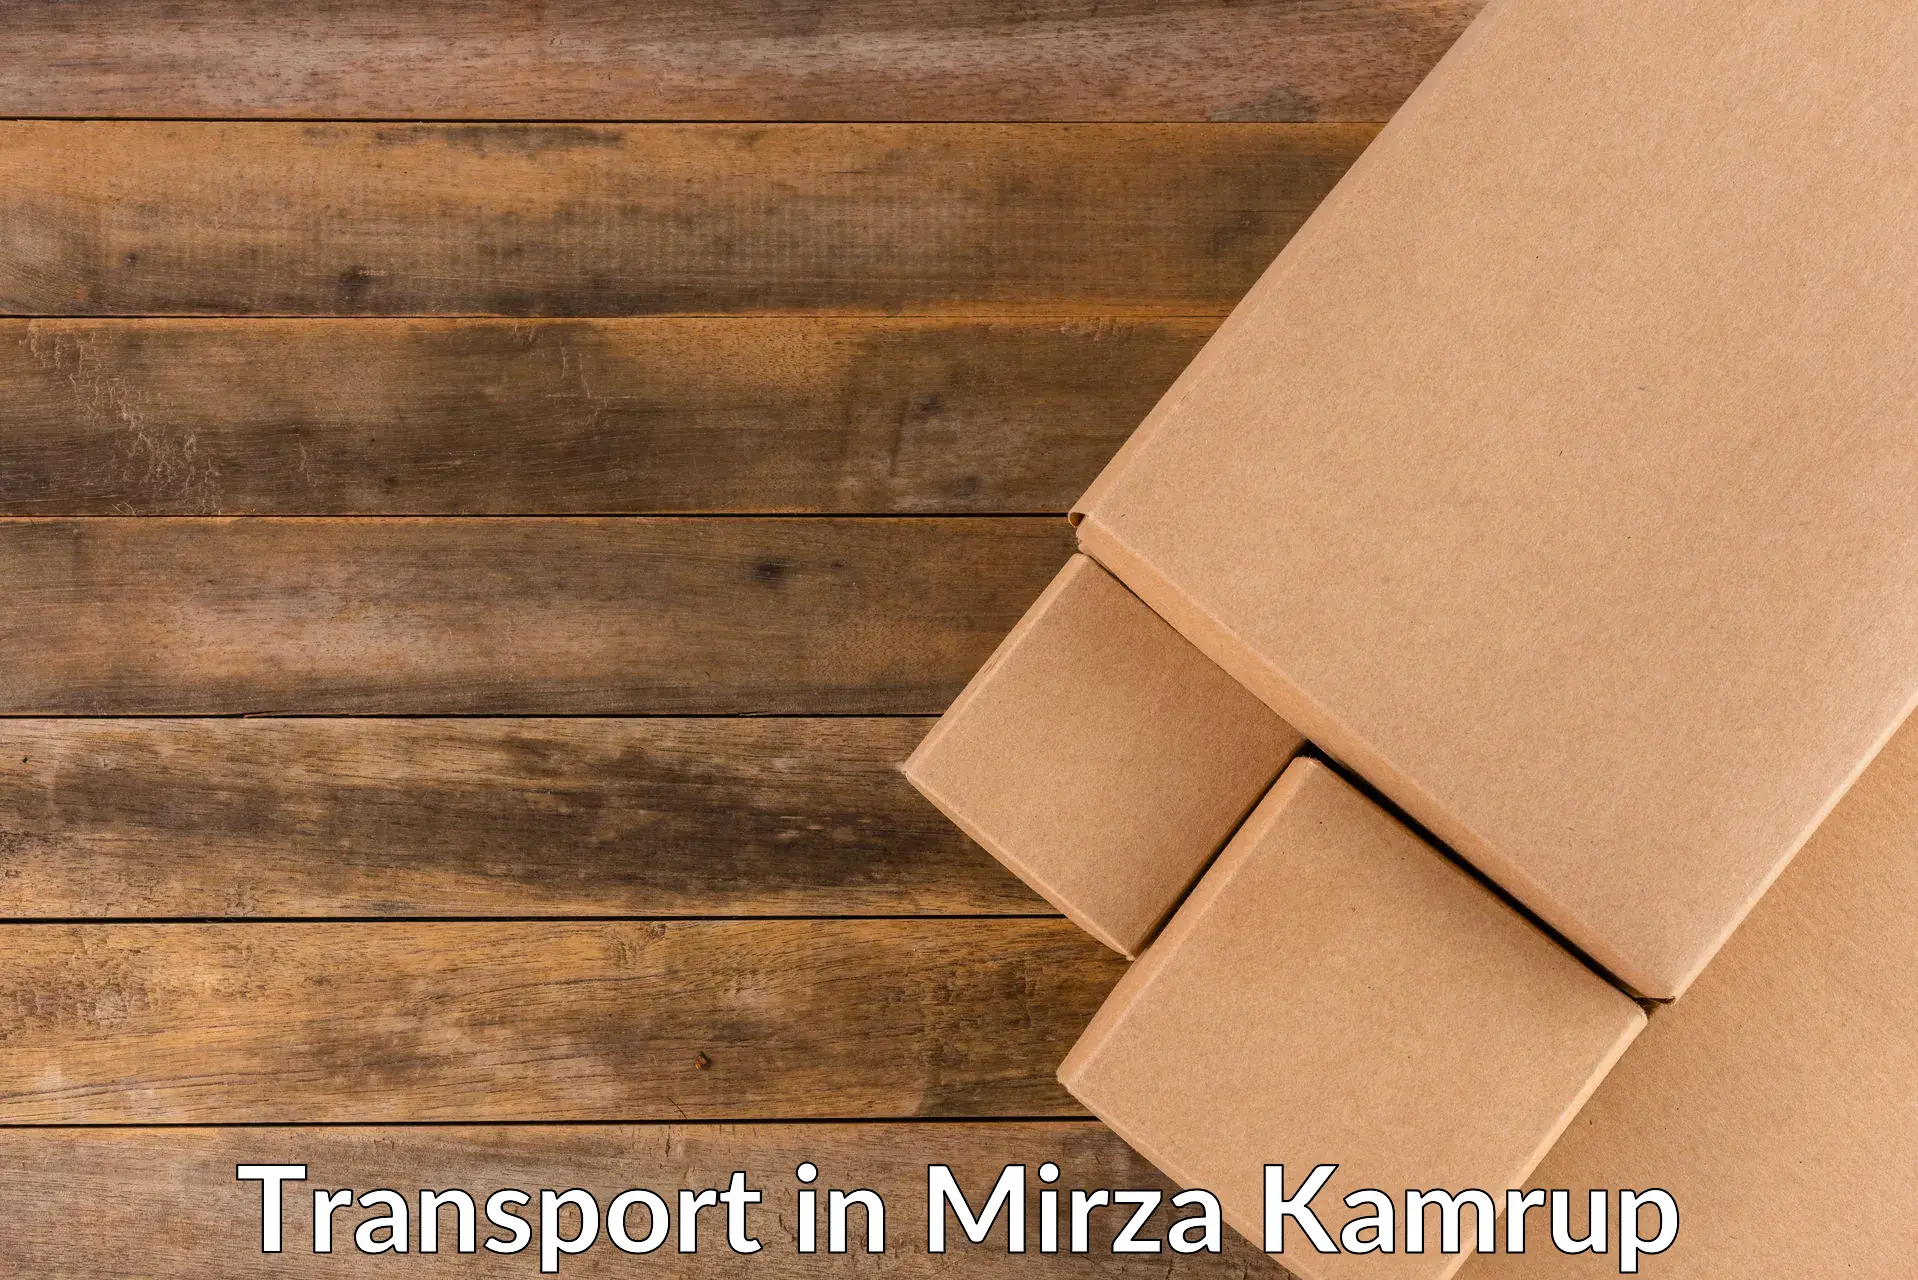 Container transport service in Mirza Kamrup